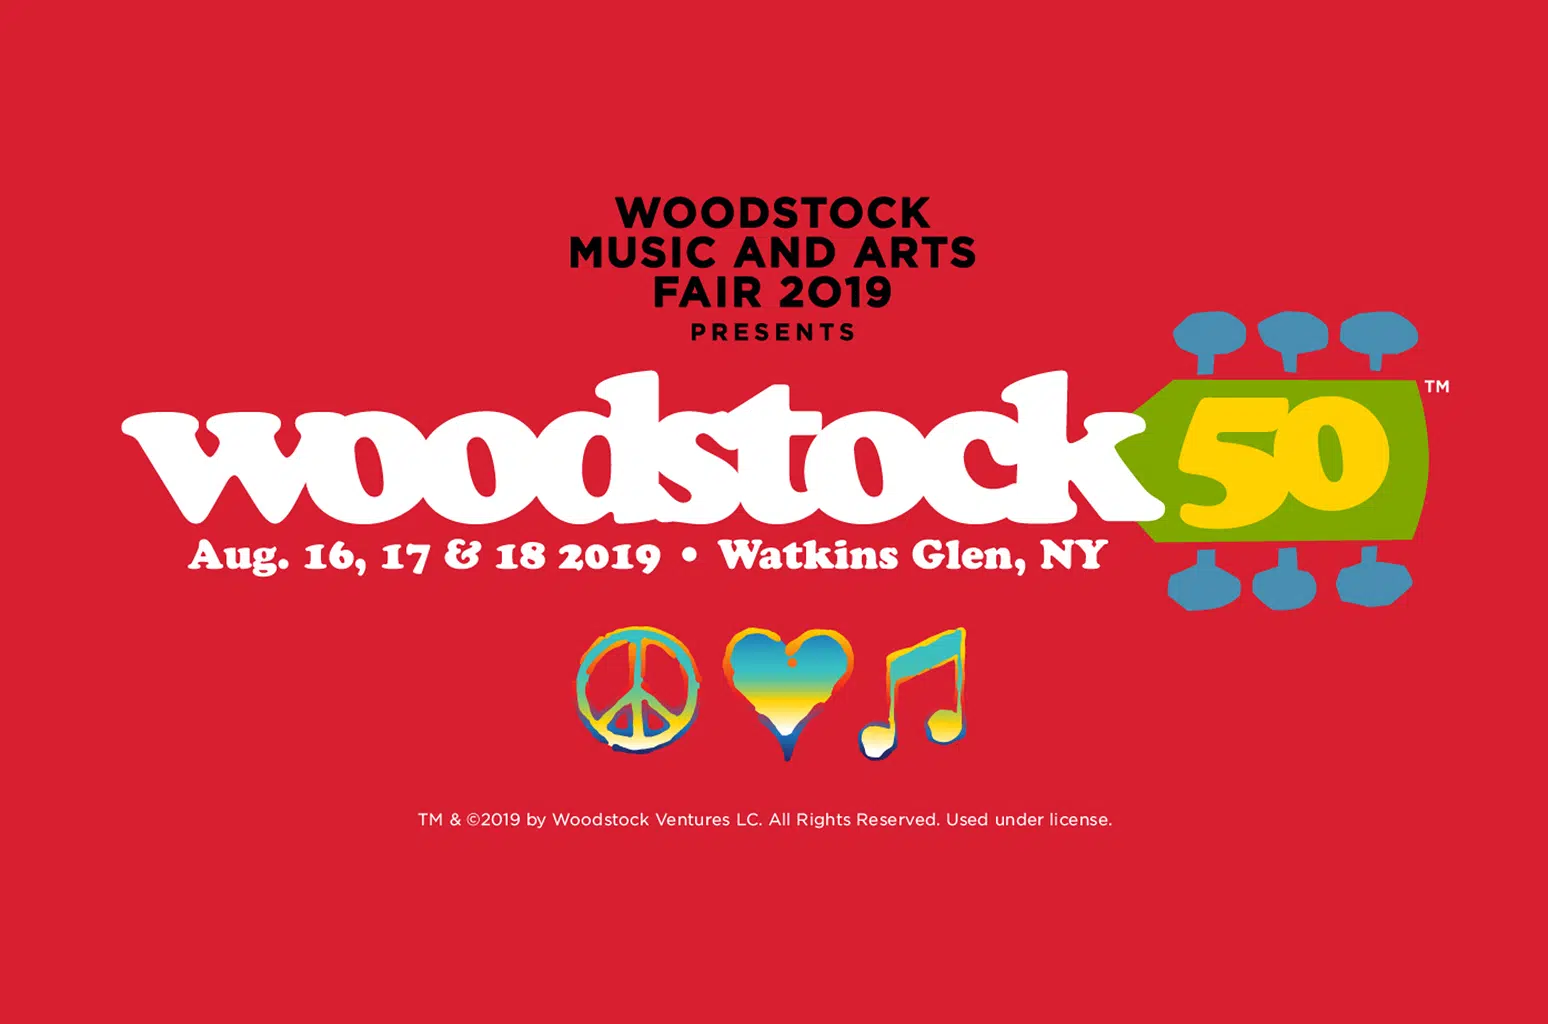 UPDATE: Woodstock 50 Officially Canceled